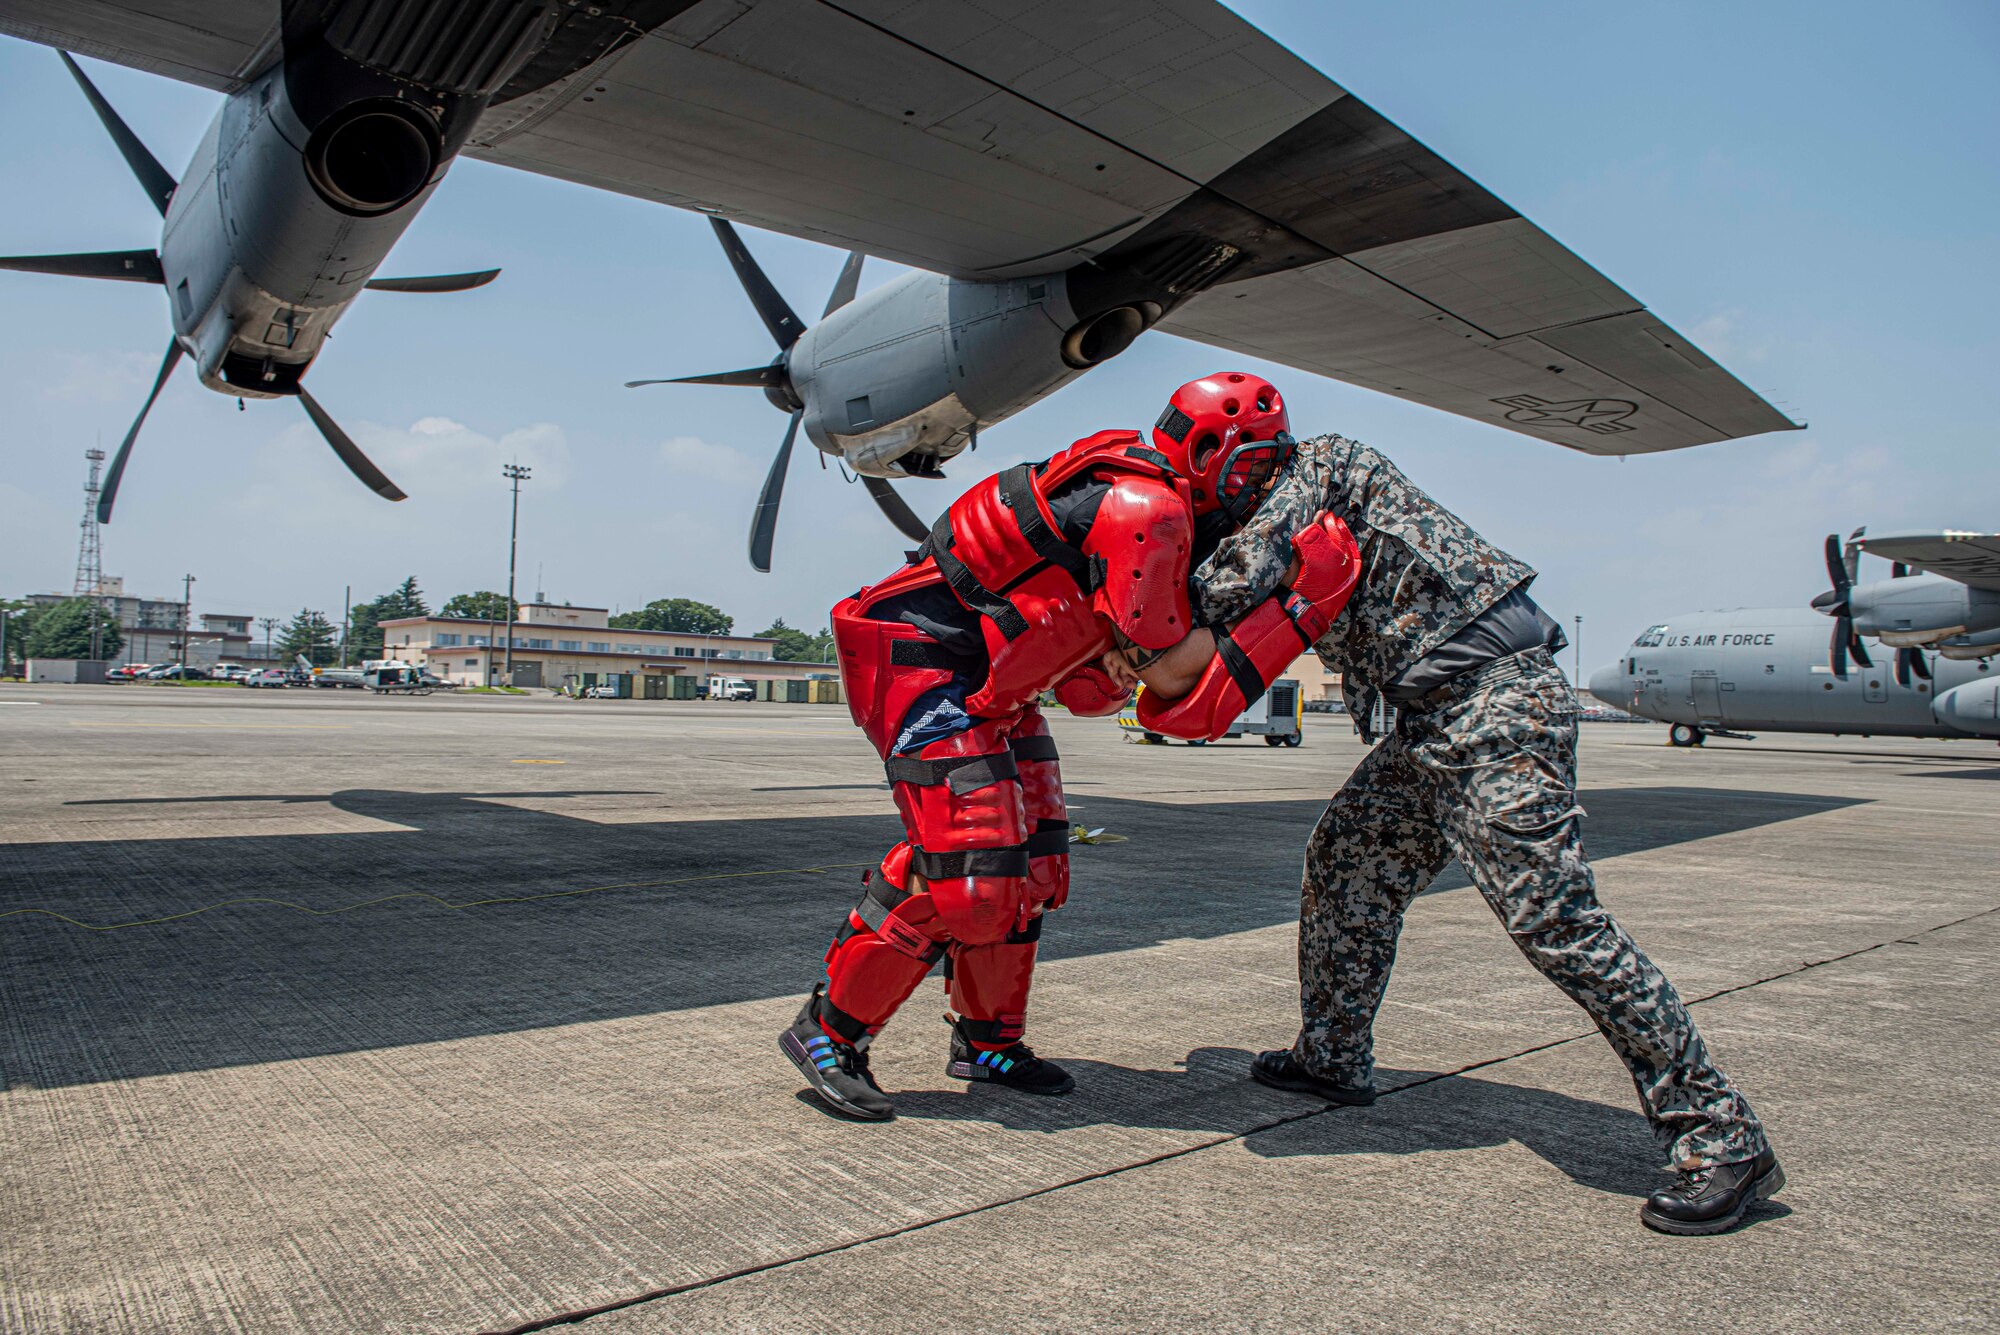 A Koku-Jieitai (Japan Air Self-Defense Force) member reacts to a simulated intruder by implementing a combative technique learned during a bilateral aircraft security training event at Yokota Air Base, Japan, August 7, 2020